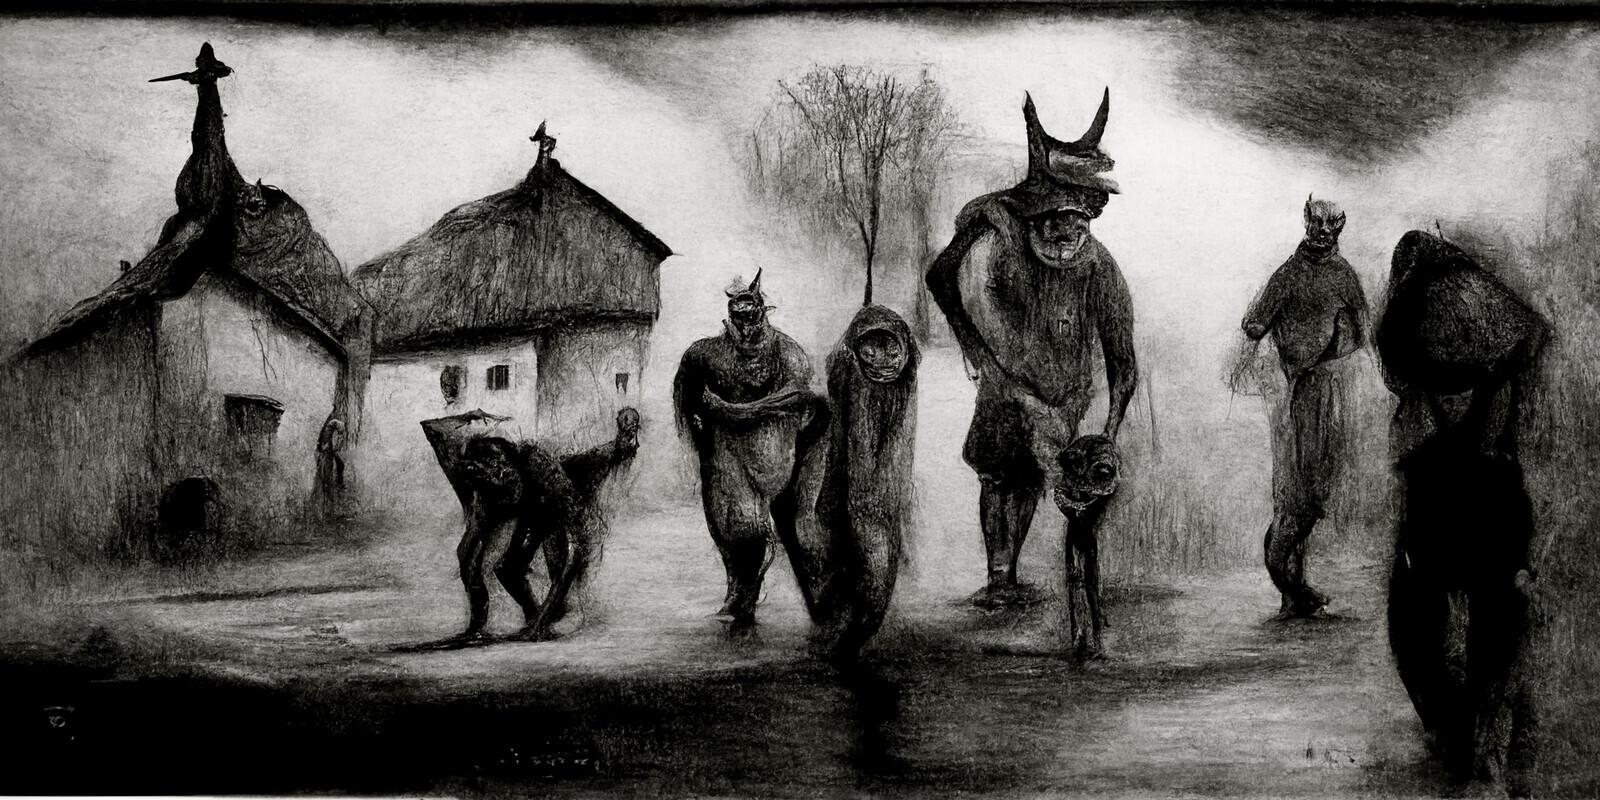 Papa and the fishermen
c. 1881
Charcoal on paper
[It is suspected that this image was likely drawn by an unnamed child in Cer Mare that had fled post-event.]